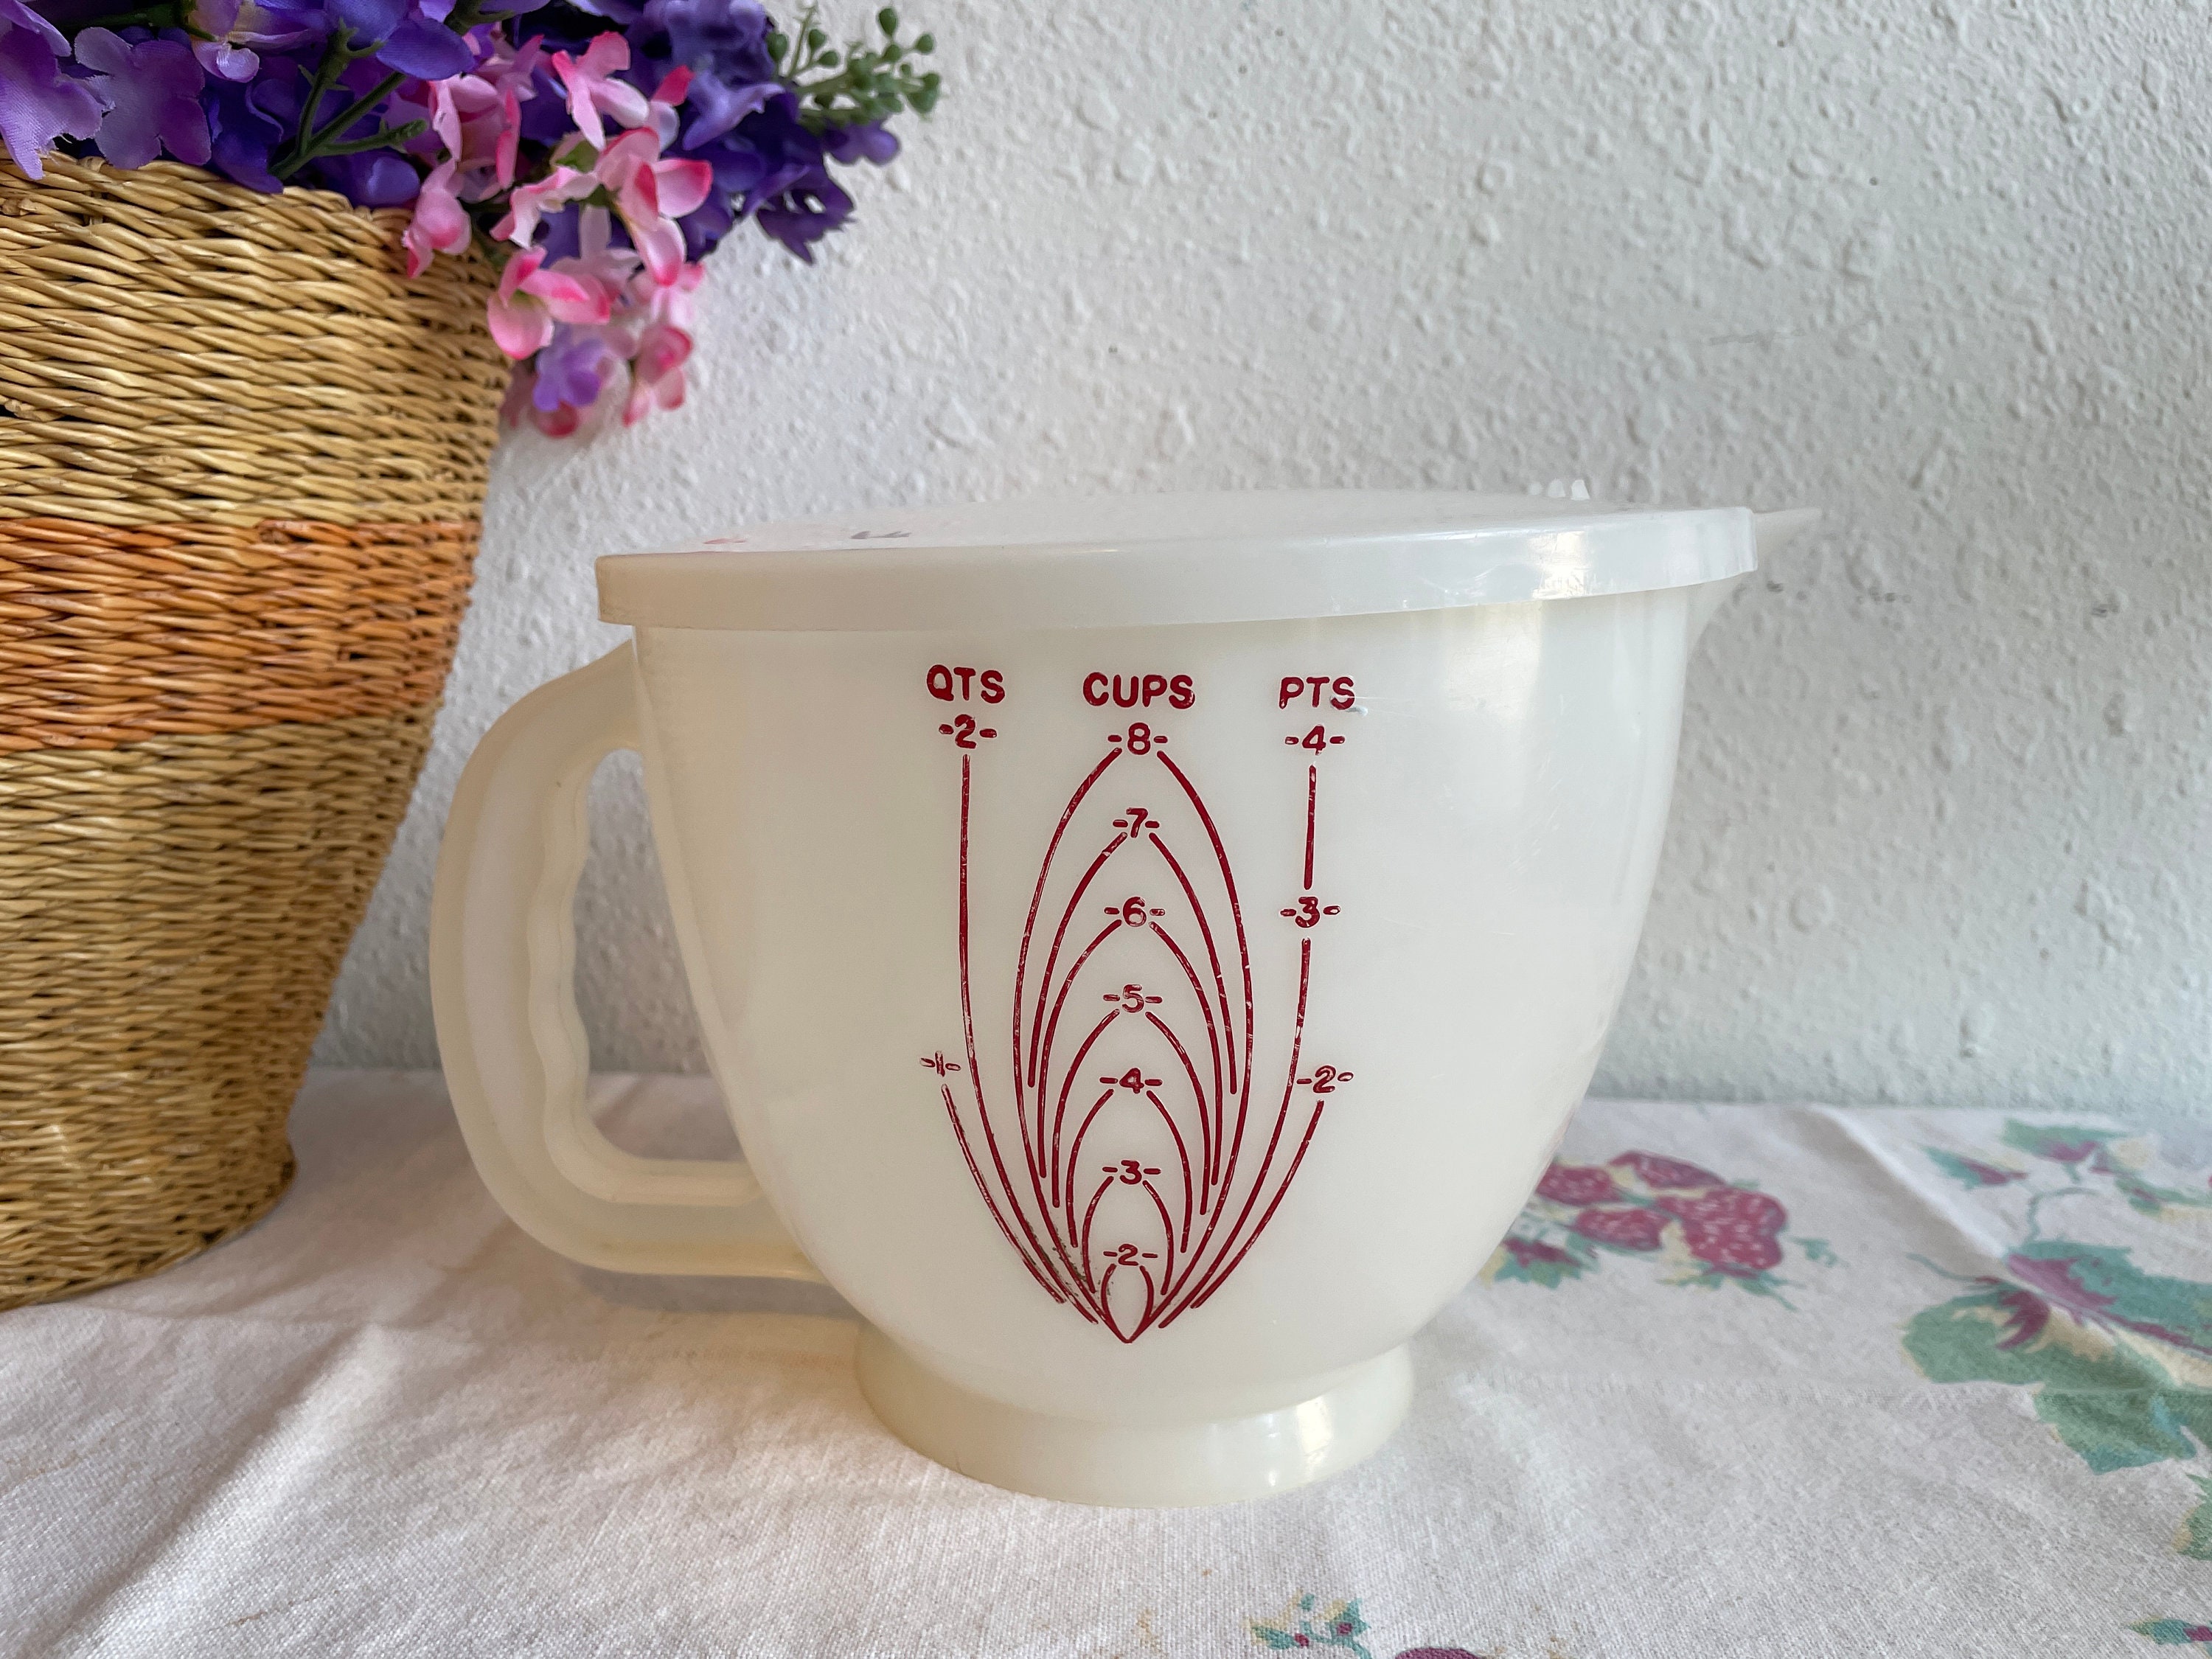 Vintage Tupperware Small Pitcher Red Push Button Top Frosted White Base  1681-3, Kitchen Must Have, Home Decor 